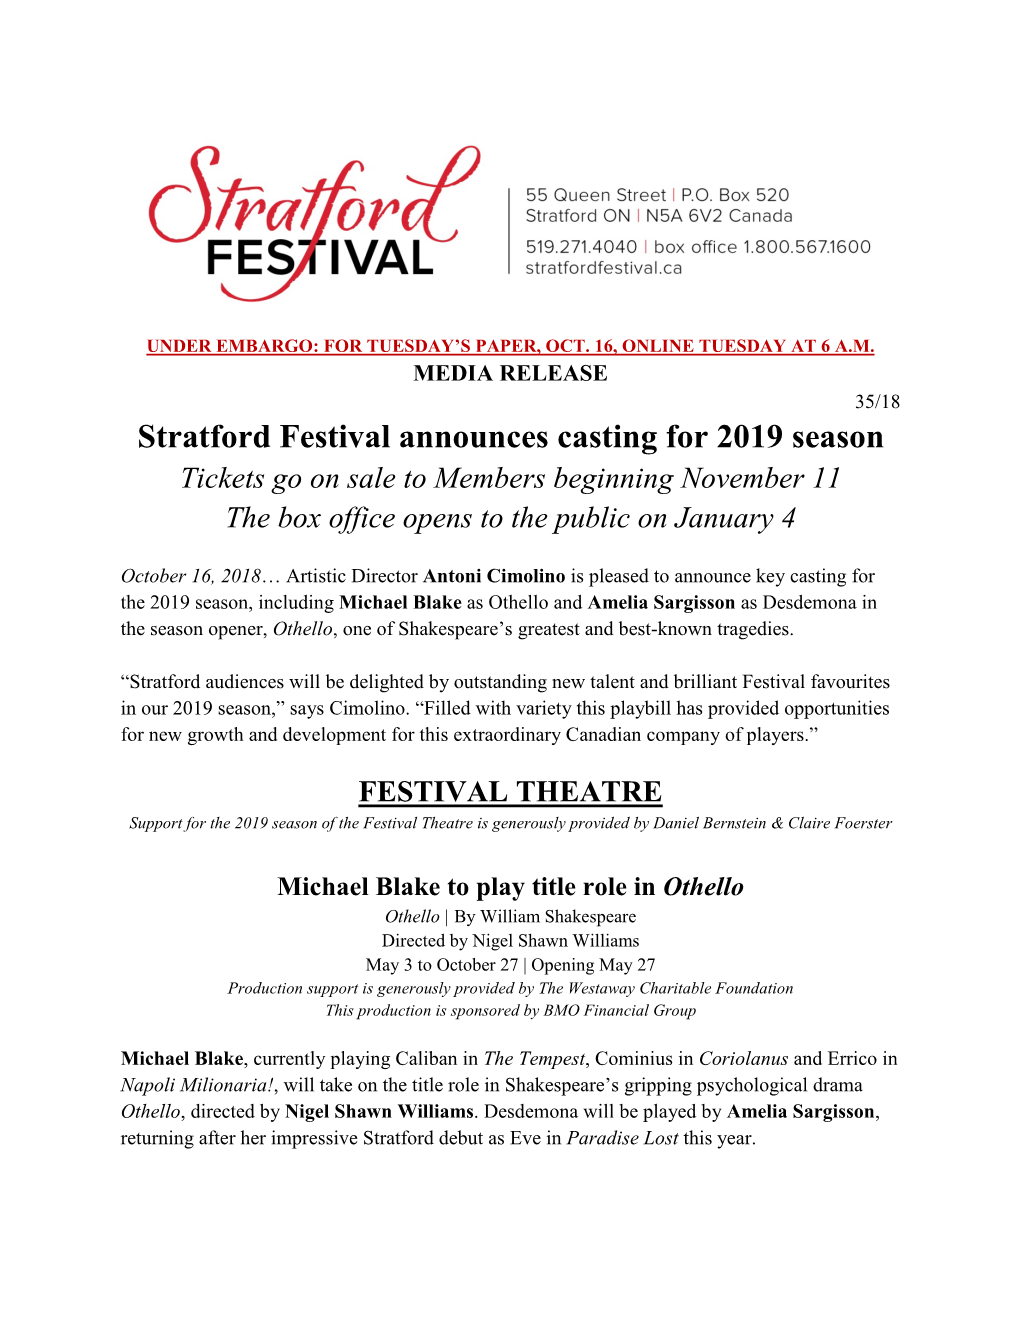 Stratford Festival Announces Casting for 2019 Season Tickets Go on Sale to Members Beginning November 11 the Box Office Opens to the Public on January 4